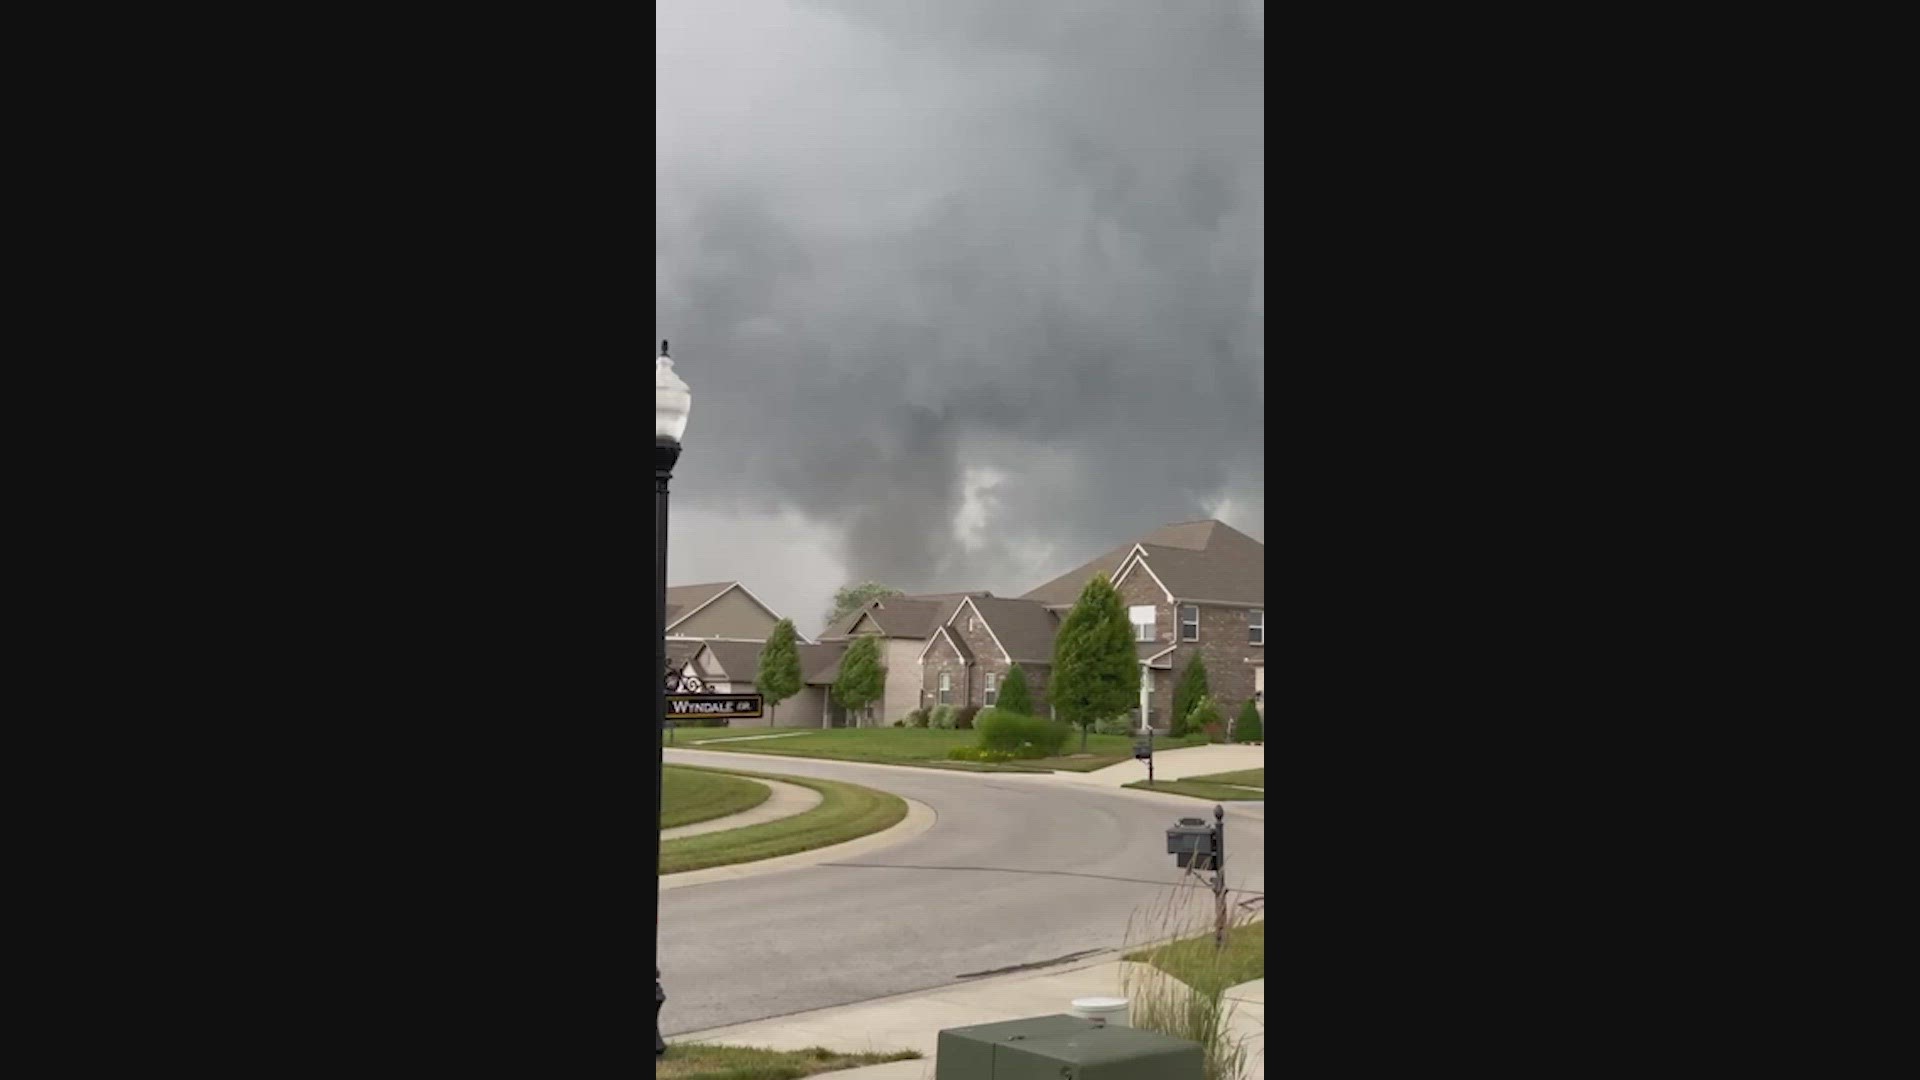 Brent Sweeney sent 13News this video of a tornado hitting the Bargersville, Indiana area.